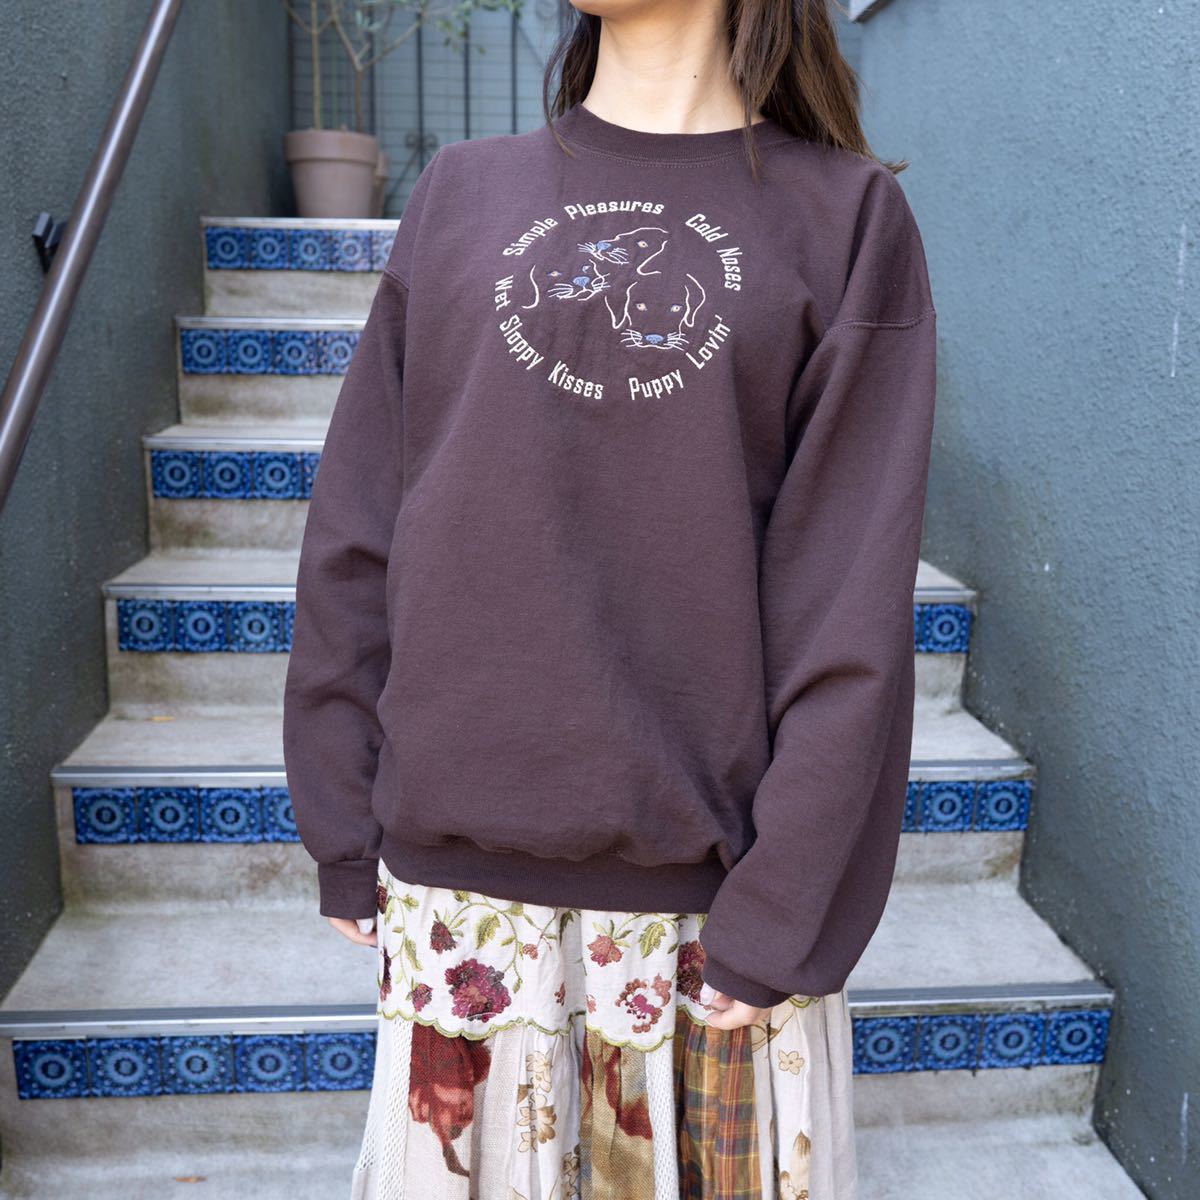 USA VINTAGE three DOGS EMBROIDERY DESIGN SWEAT SHIRT/アメリカ古着3匹のわんこ刺繍デザインスウェット_画像2